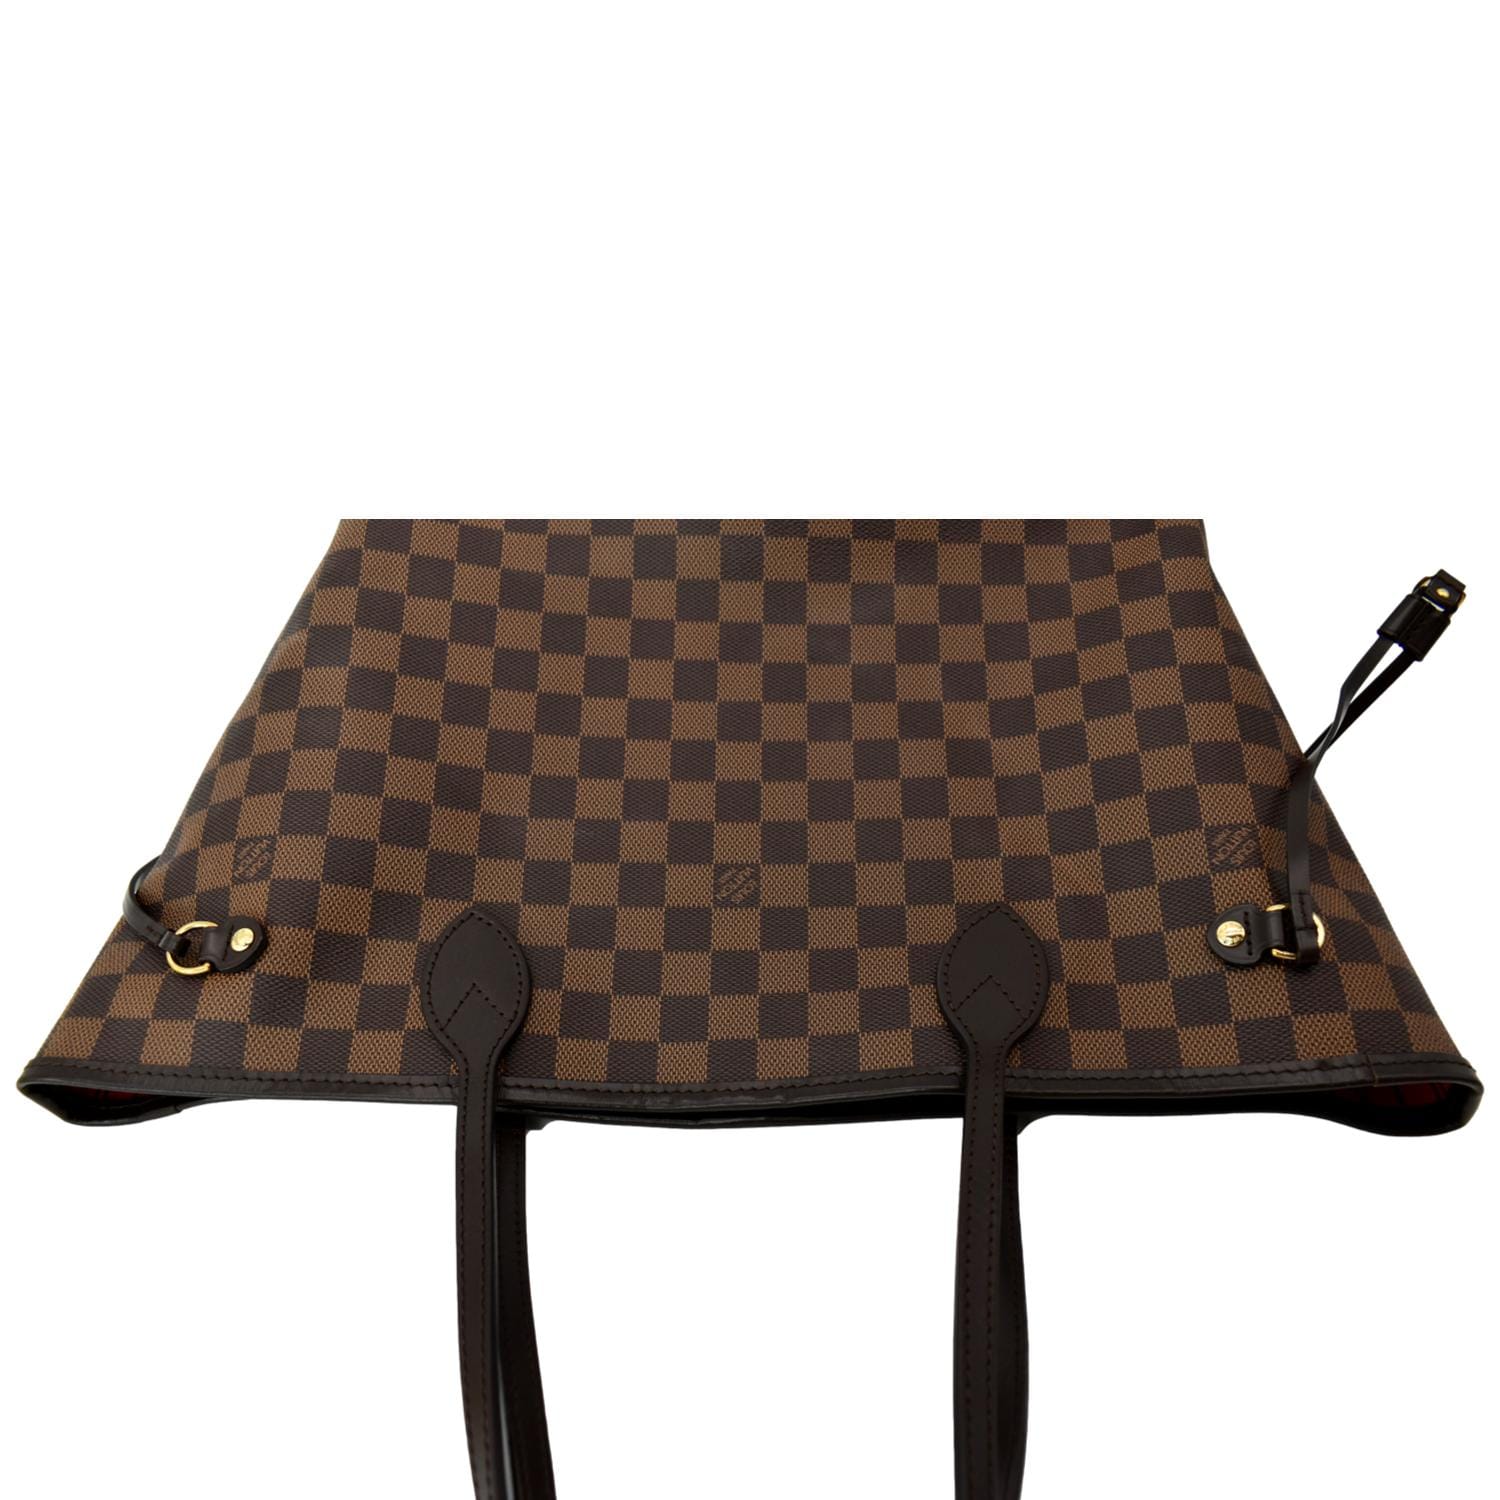 Louis Vuitton Neverfull MM (Damier Ebene) - May's Collections